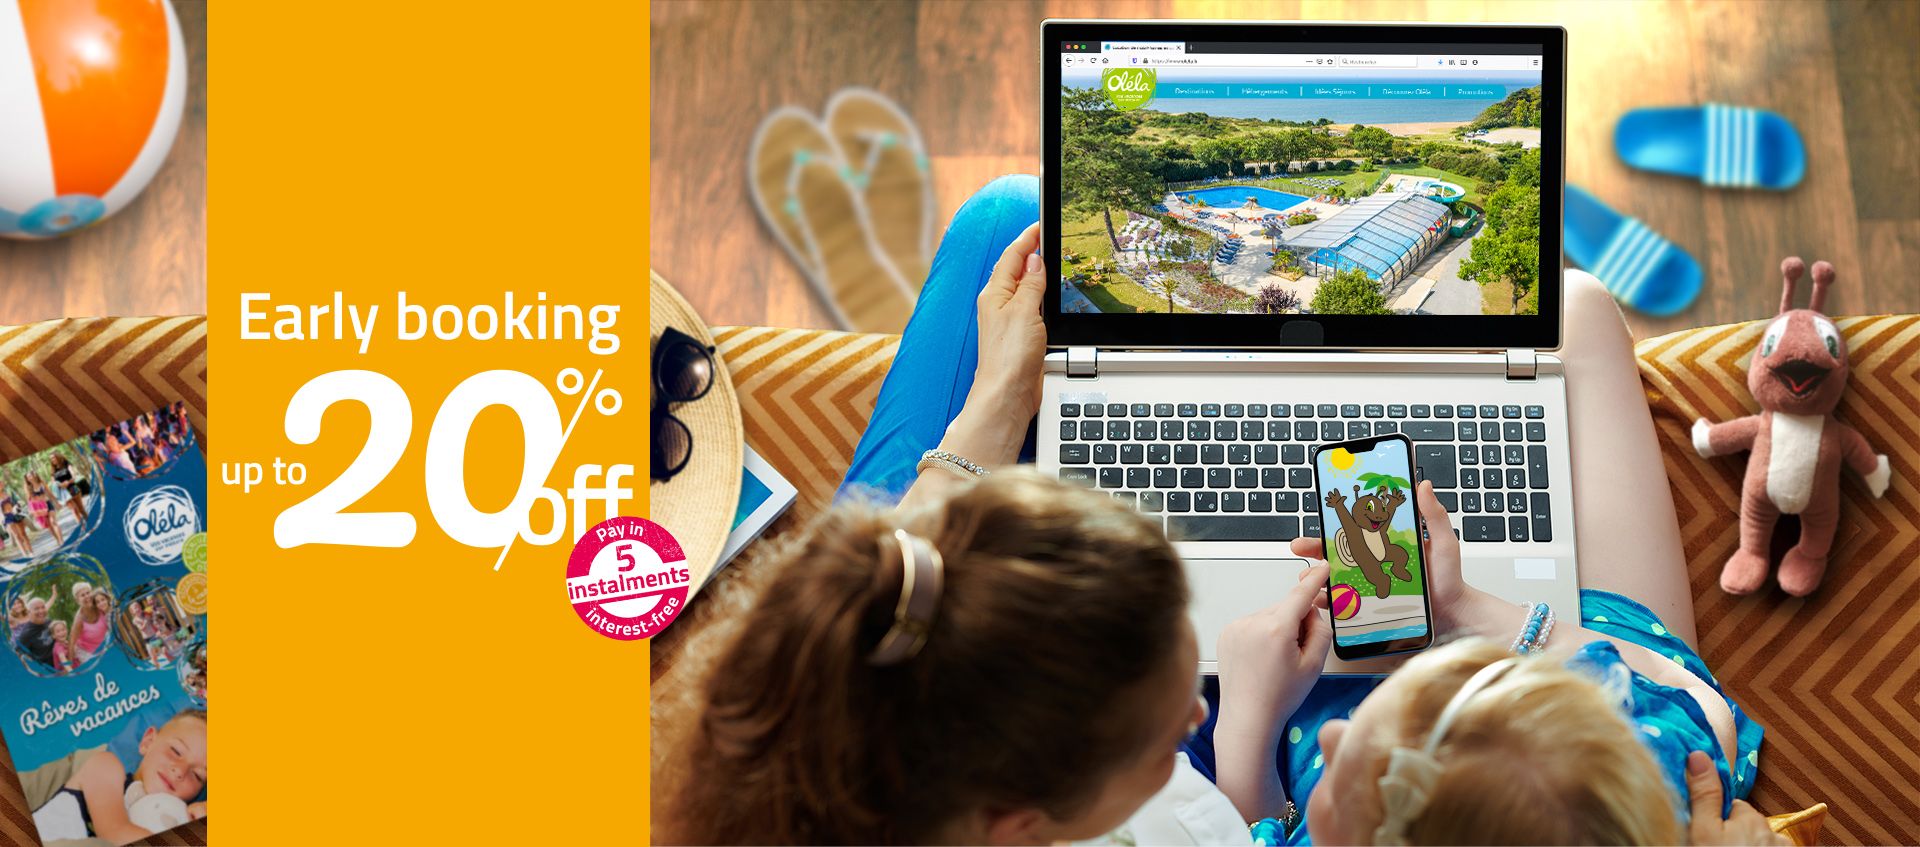 Early booking: up to 20%!